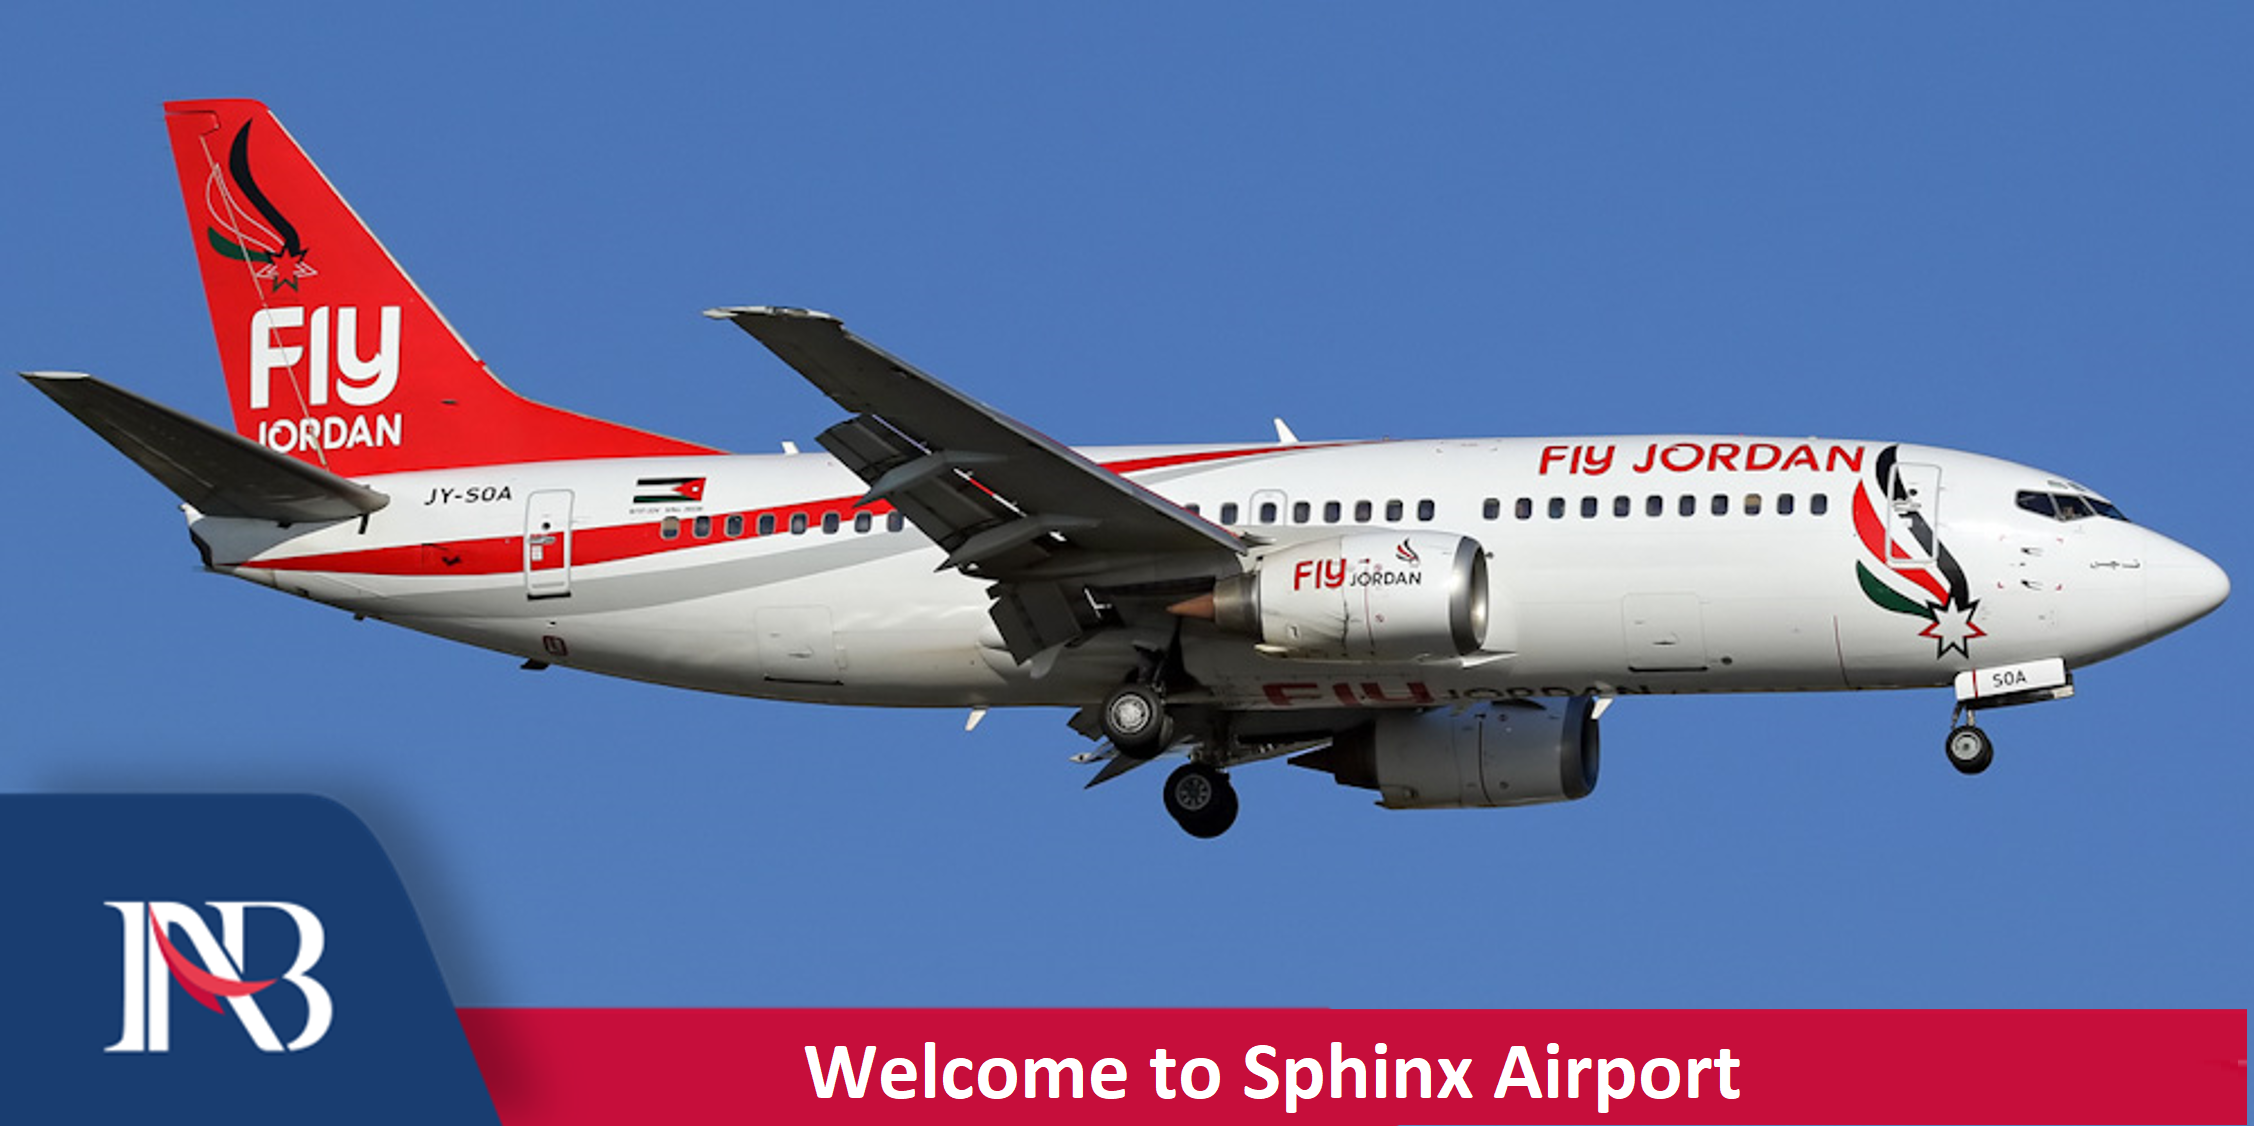 First Flight to Sphinx Airport